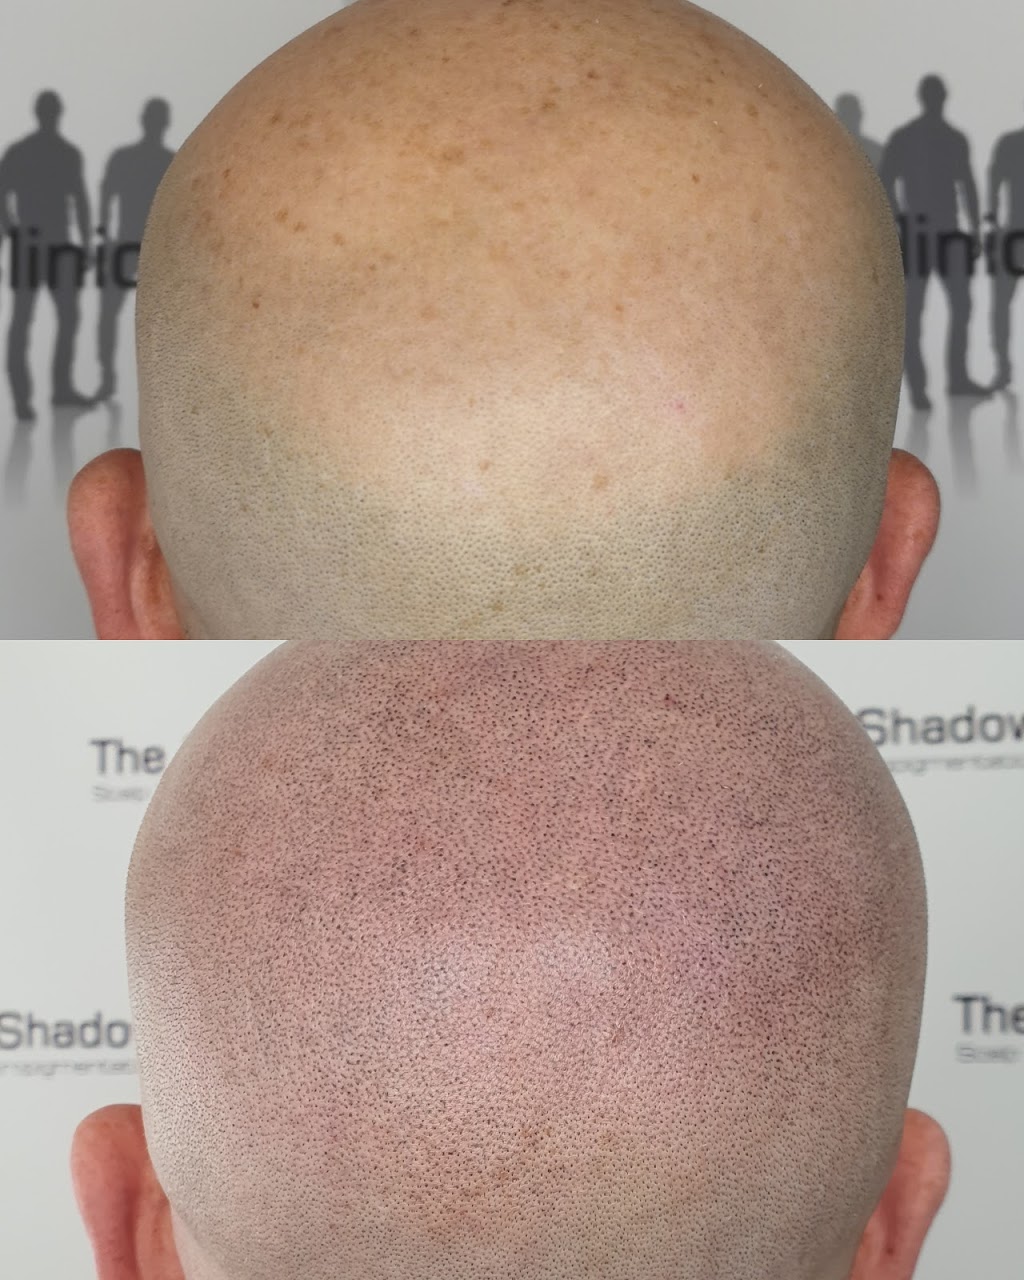 The Shadow Clinic Canberra | 1C/39 Grimwade St, Mitchell ACT 2911, Australia | Phone: 0468 364 200